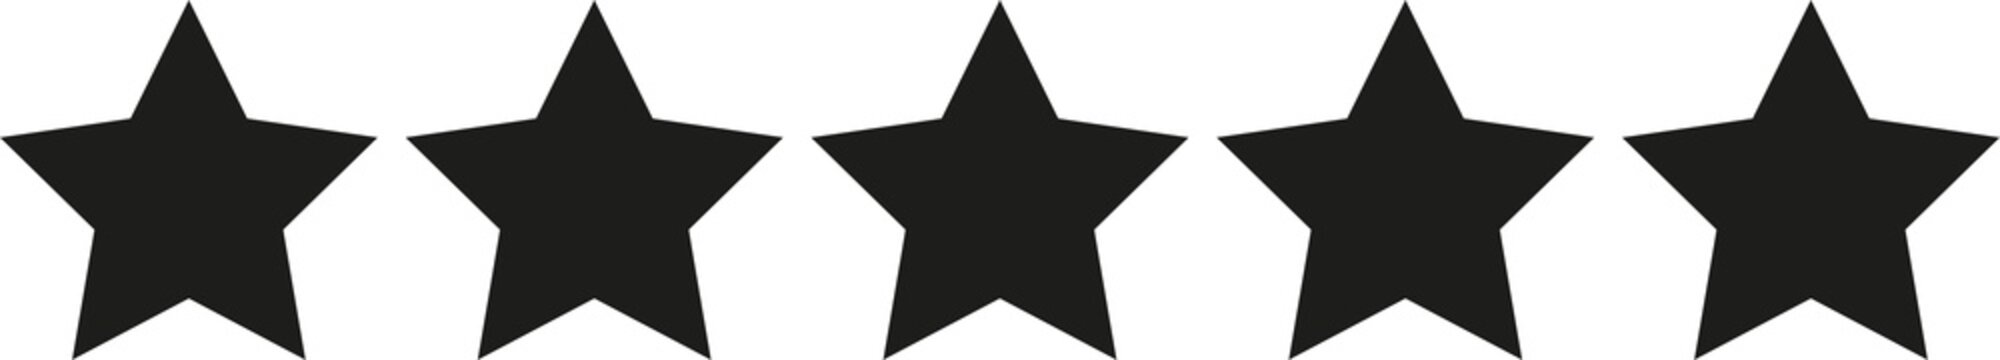 Five black stars in a row, 0-5 rating, review system. Isolated png illustration, transparent background. Asset for overlay, pattern, montage, collage. Business, customer feedback concept.